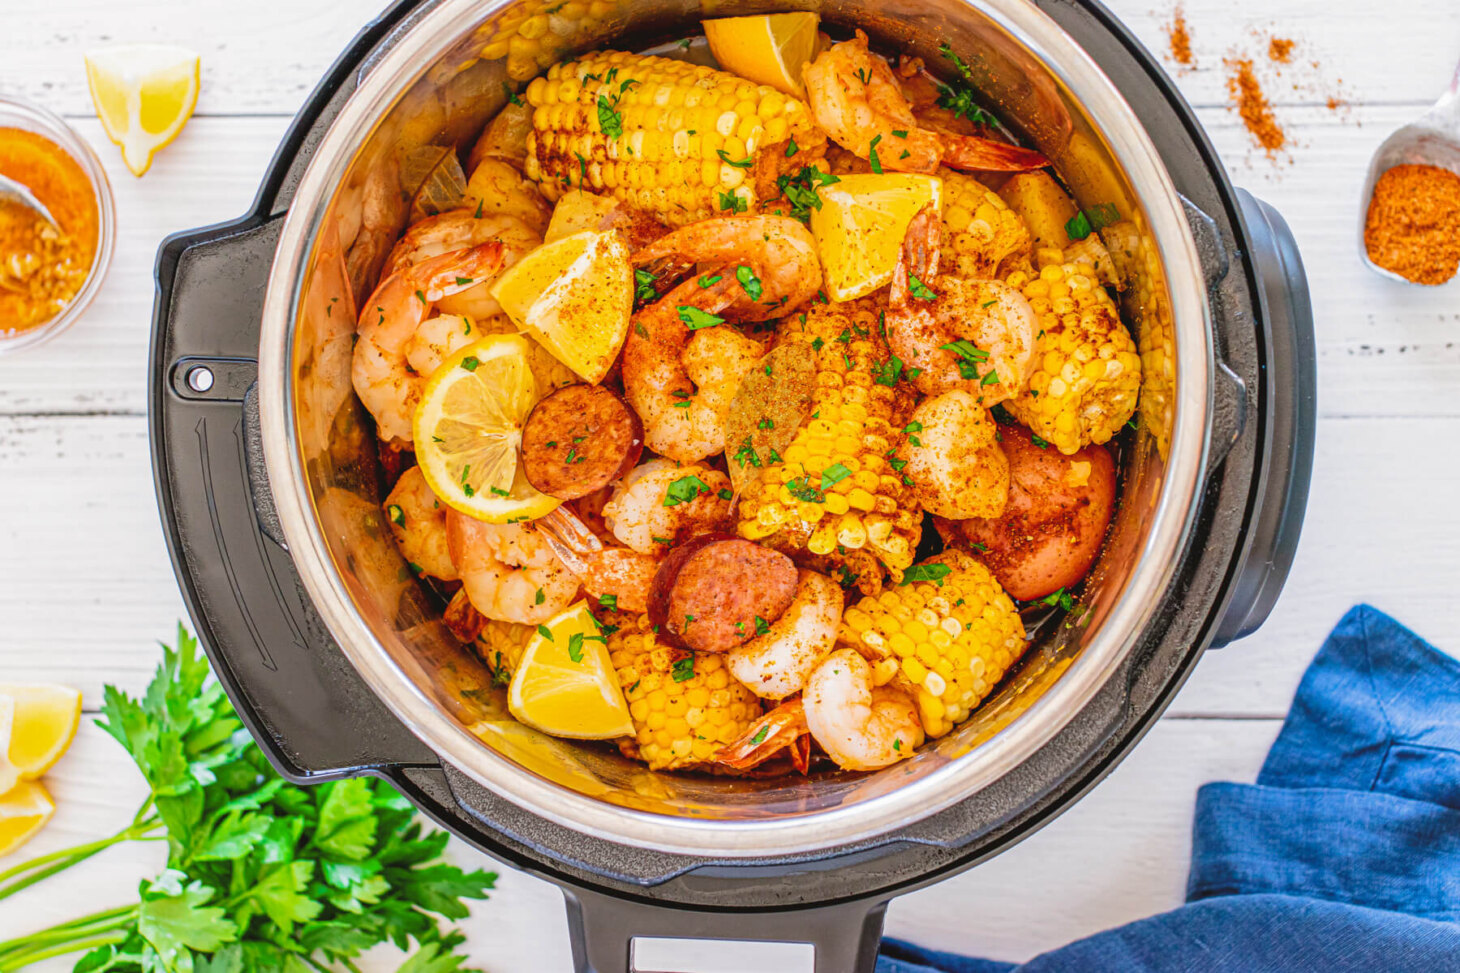 Cooked shrimp boil - Spice coated shrimp, potatoes, and corn in an Instant Pot.